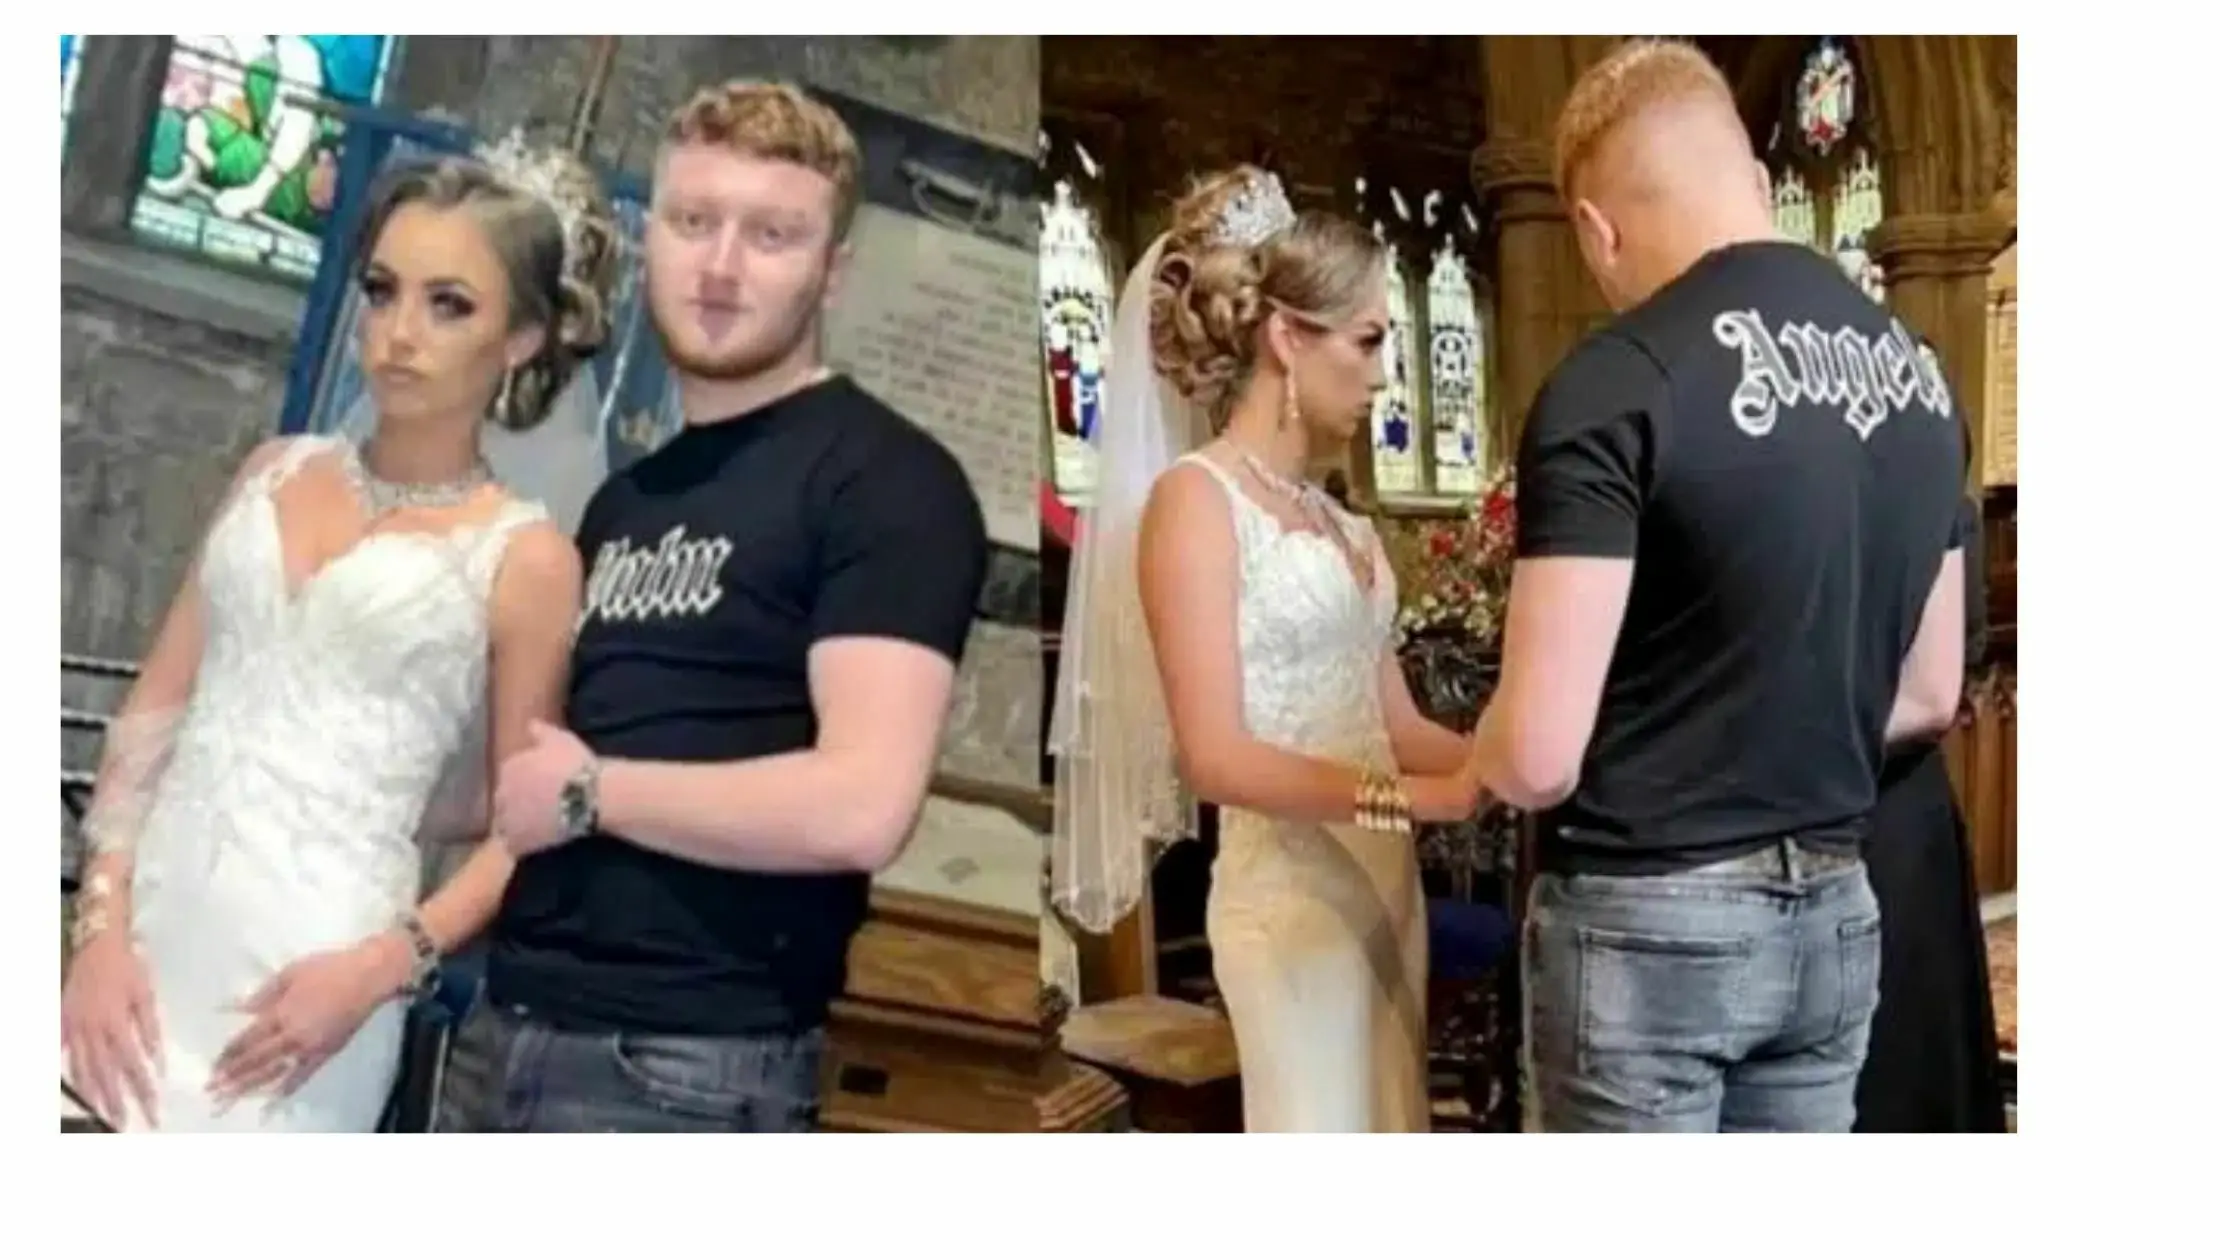 wedding-tiktok-video-goes-viral-after-man-wears-t-shirt-and-jeans-for-wedding